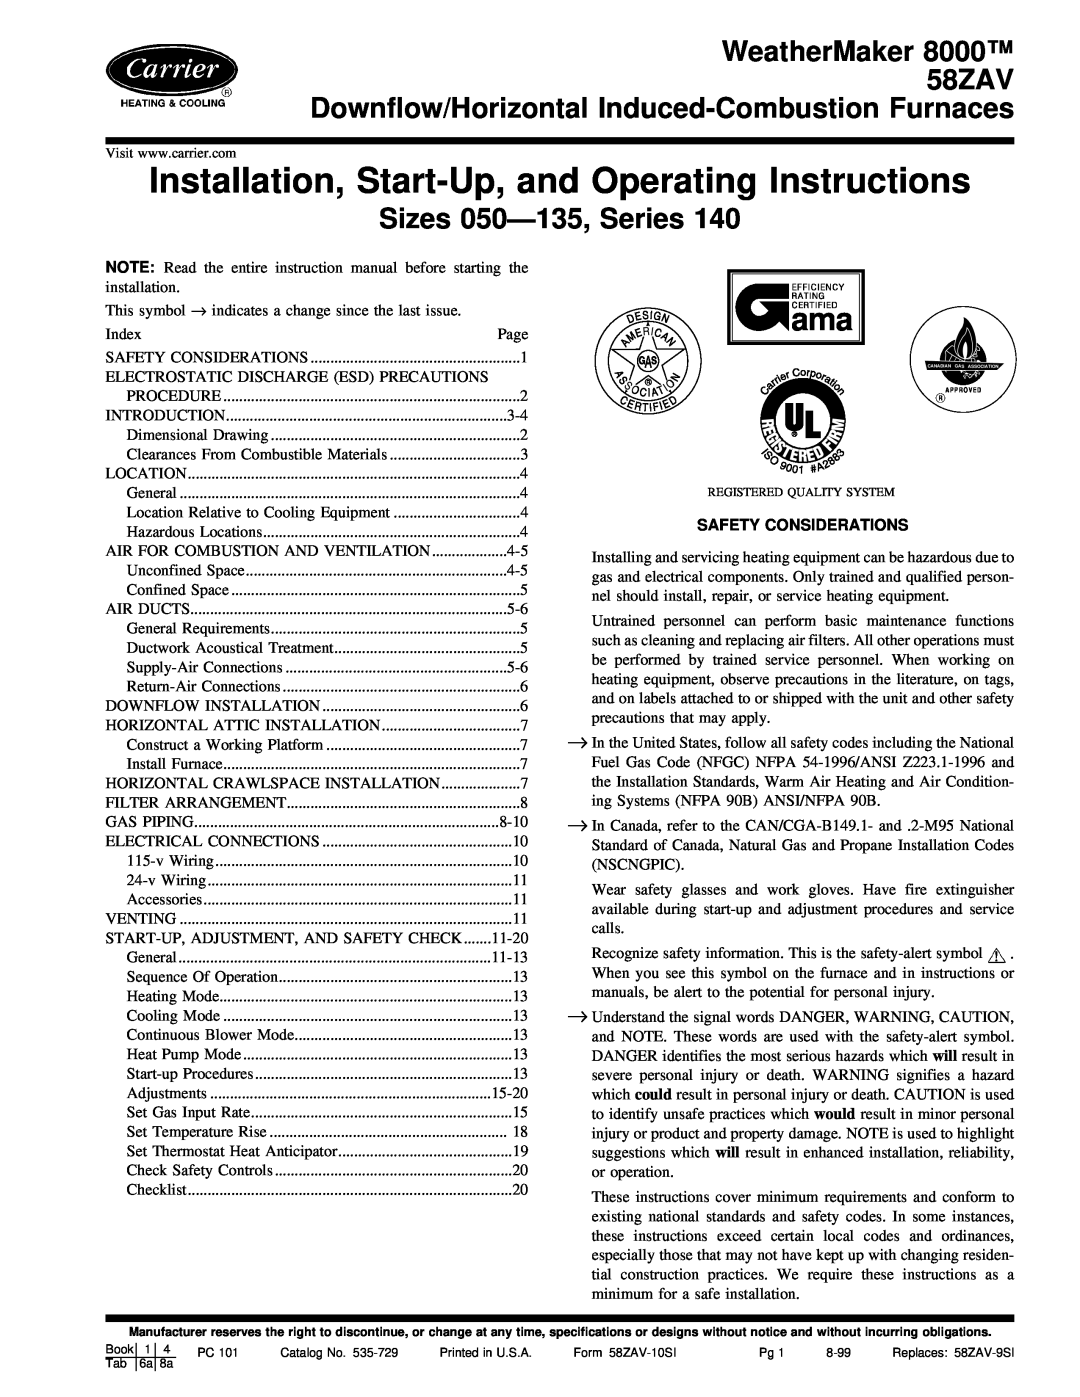 Carrier operating instructions Installation, Start-Up,and Operating Instructions, WeatherMaker 58ZAV 